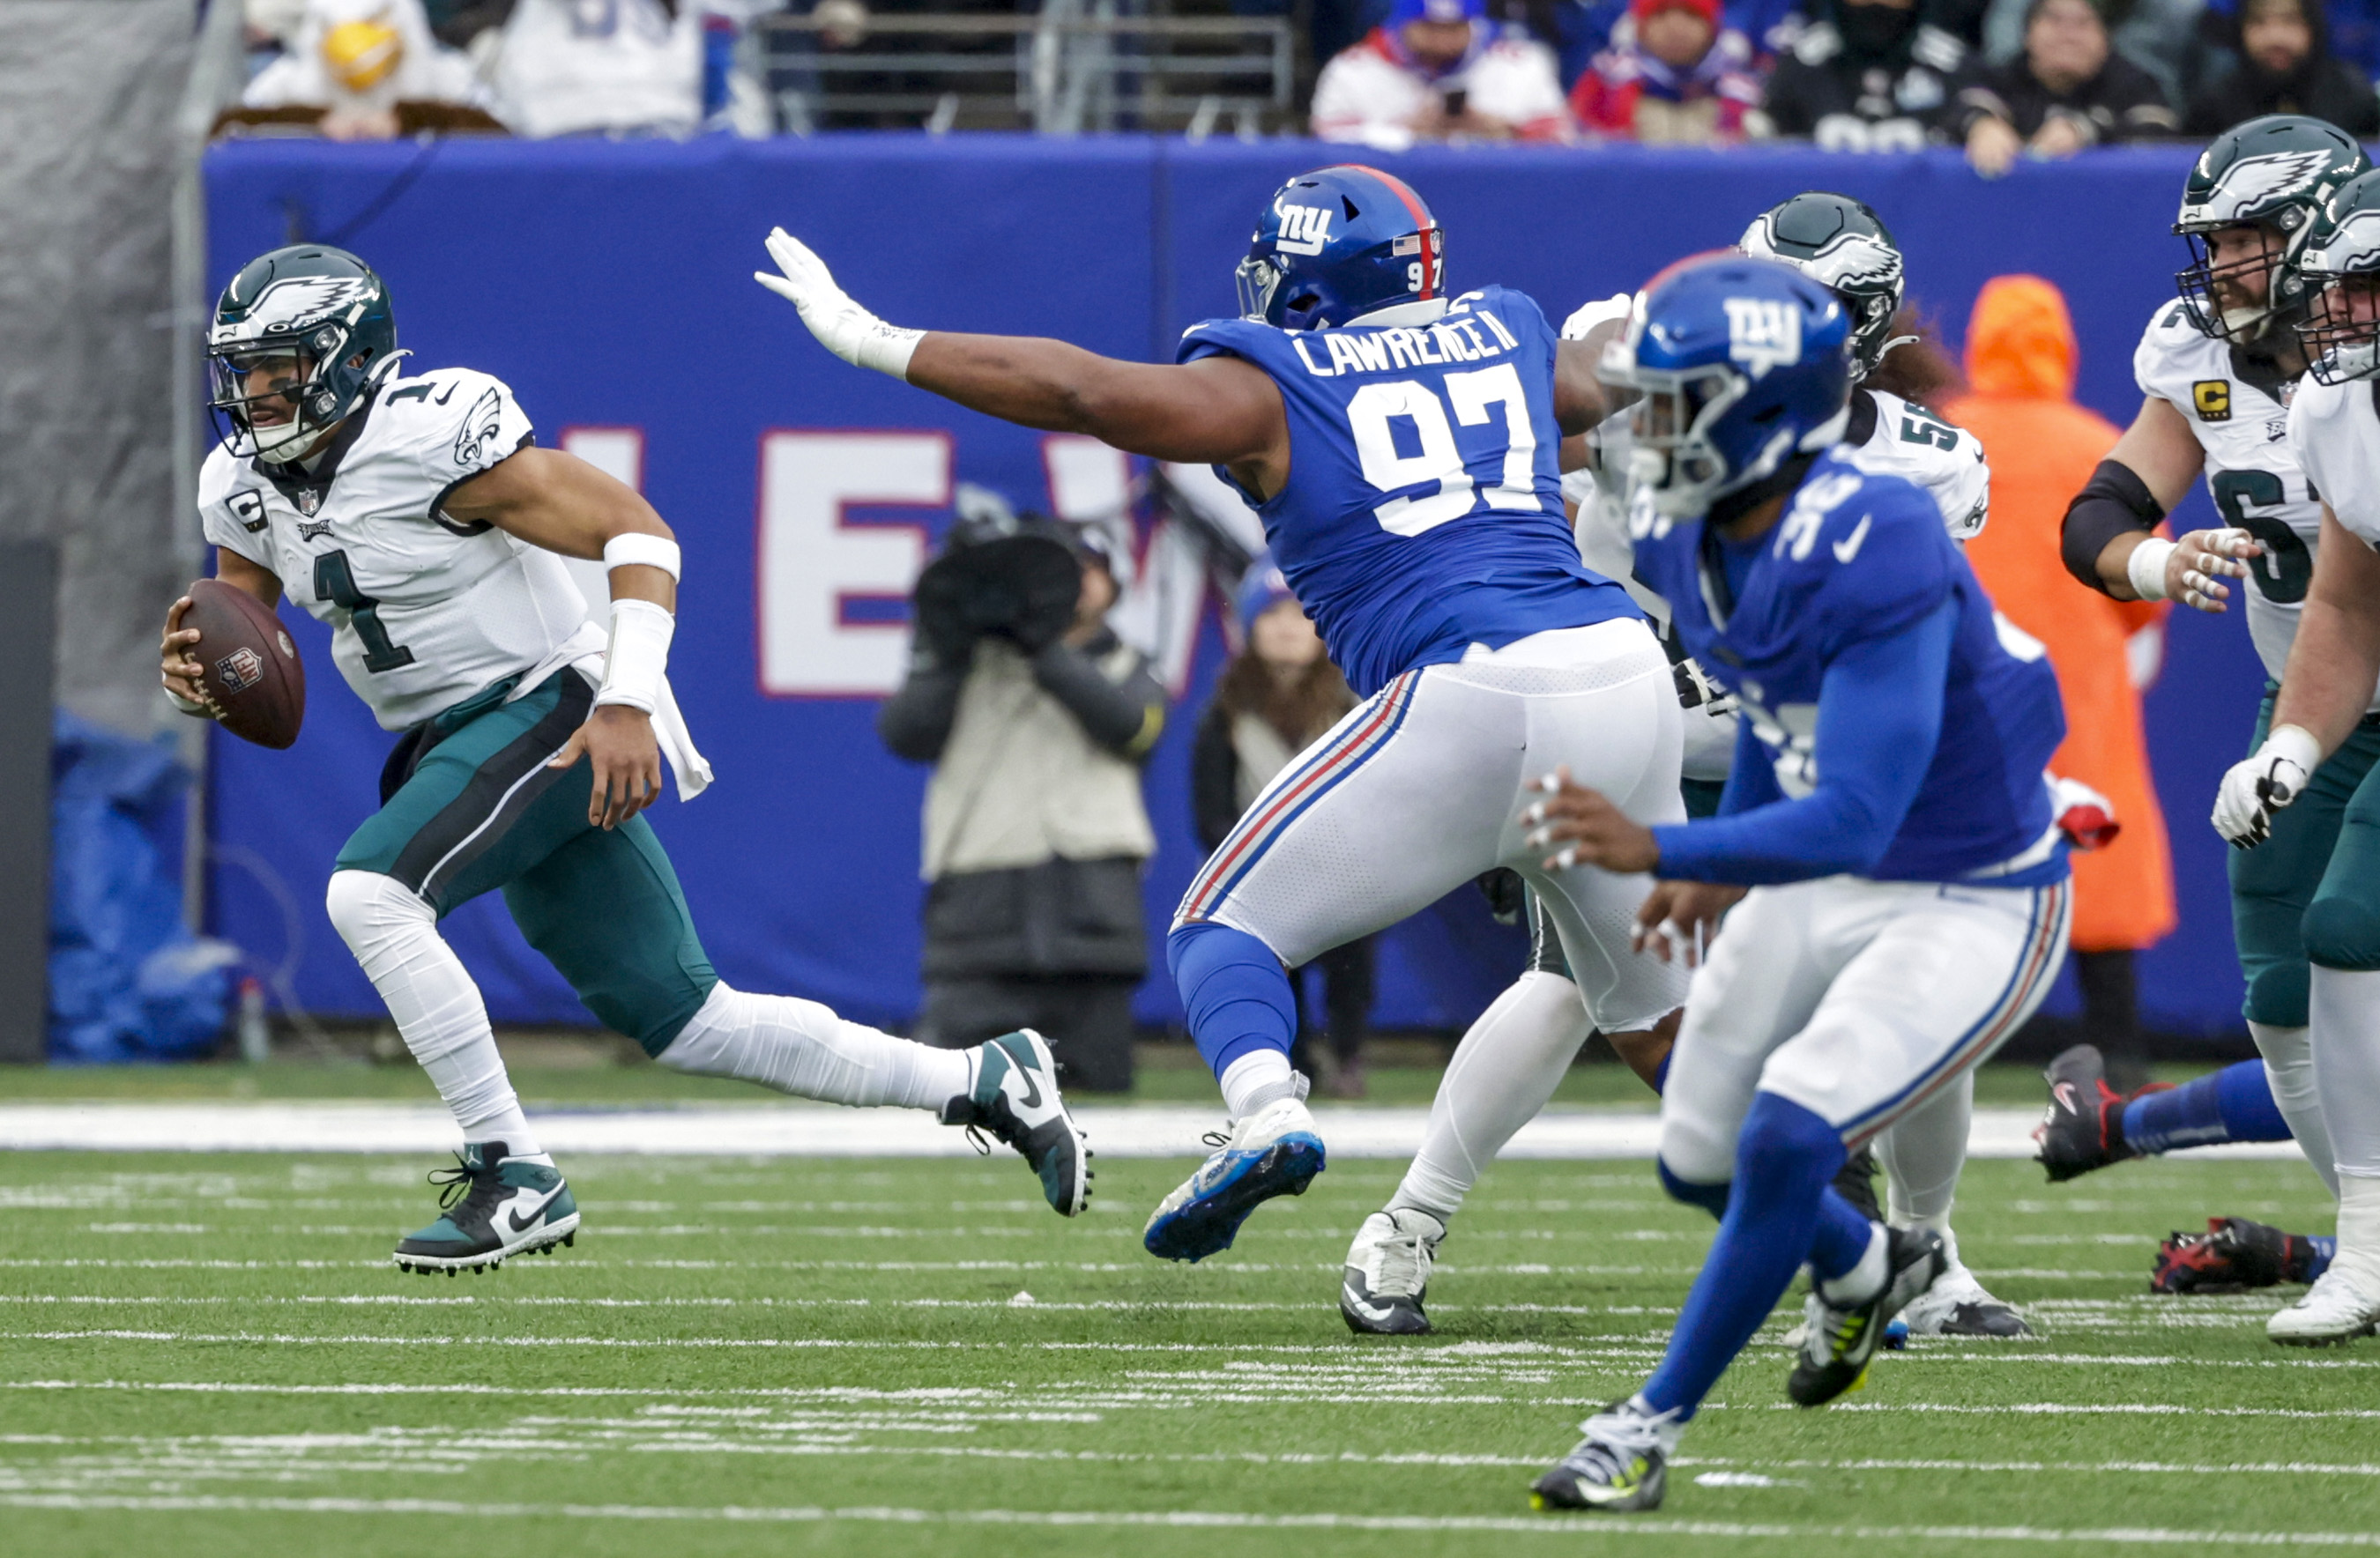 Eagles blowing doors off Giants confirmed the reality for both teams